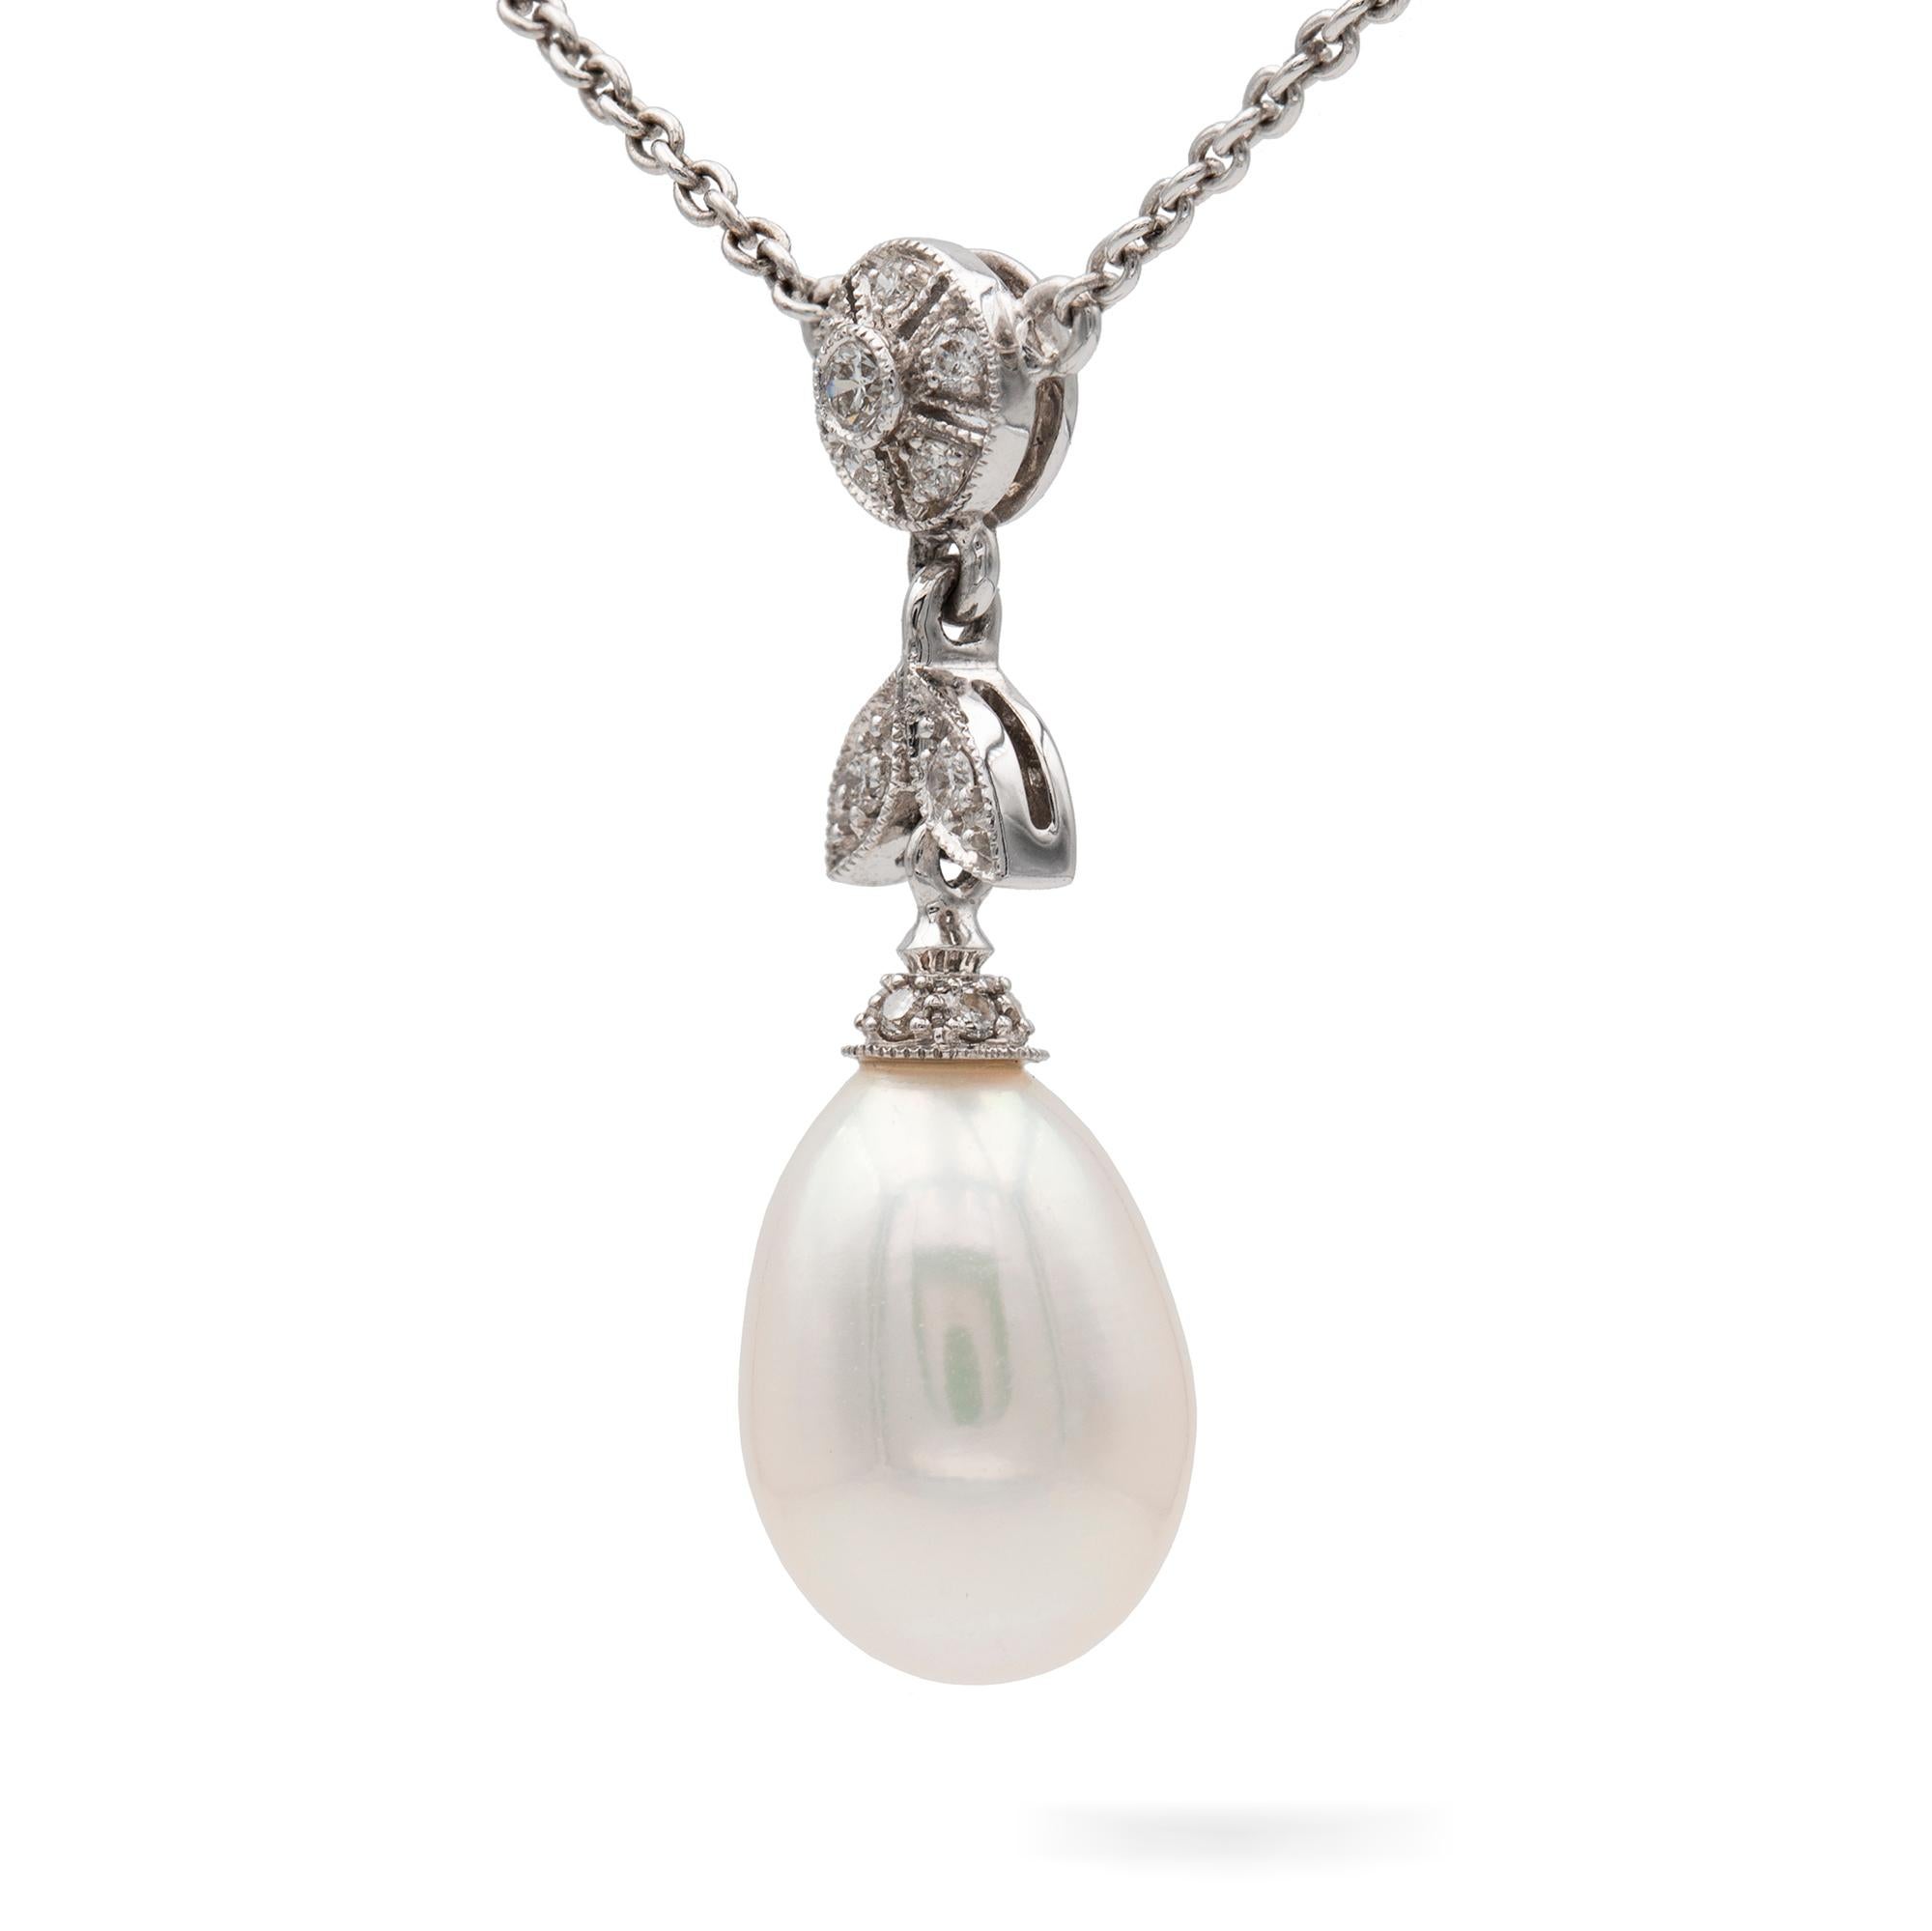 A pearl and diamond pendant/necklace, consisted of an oval-shaped pearl, with a diamond-set cap and diamond-set surmount of floral and foliate design, suspended by fine white gold trace chain set with six small round brilliant-cut diamonds, the